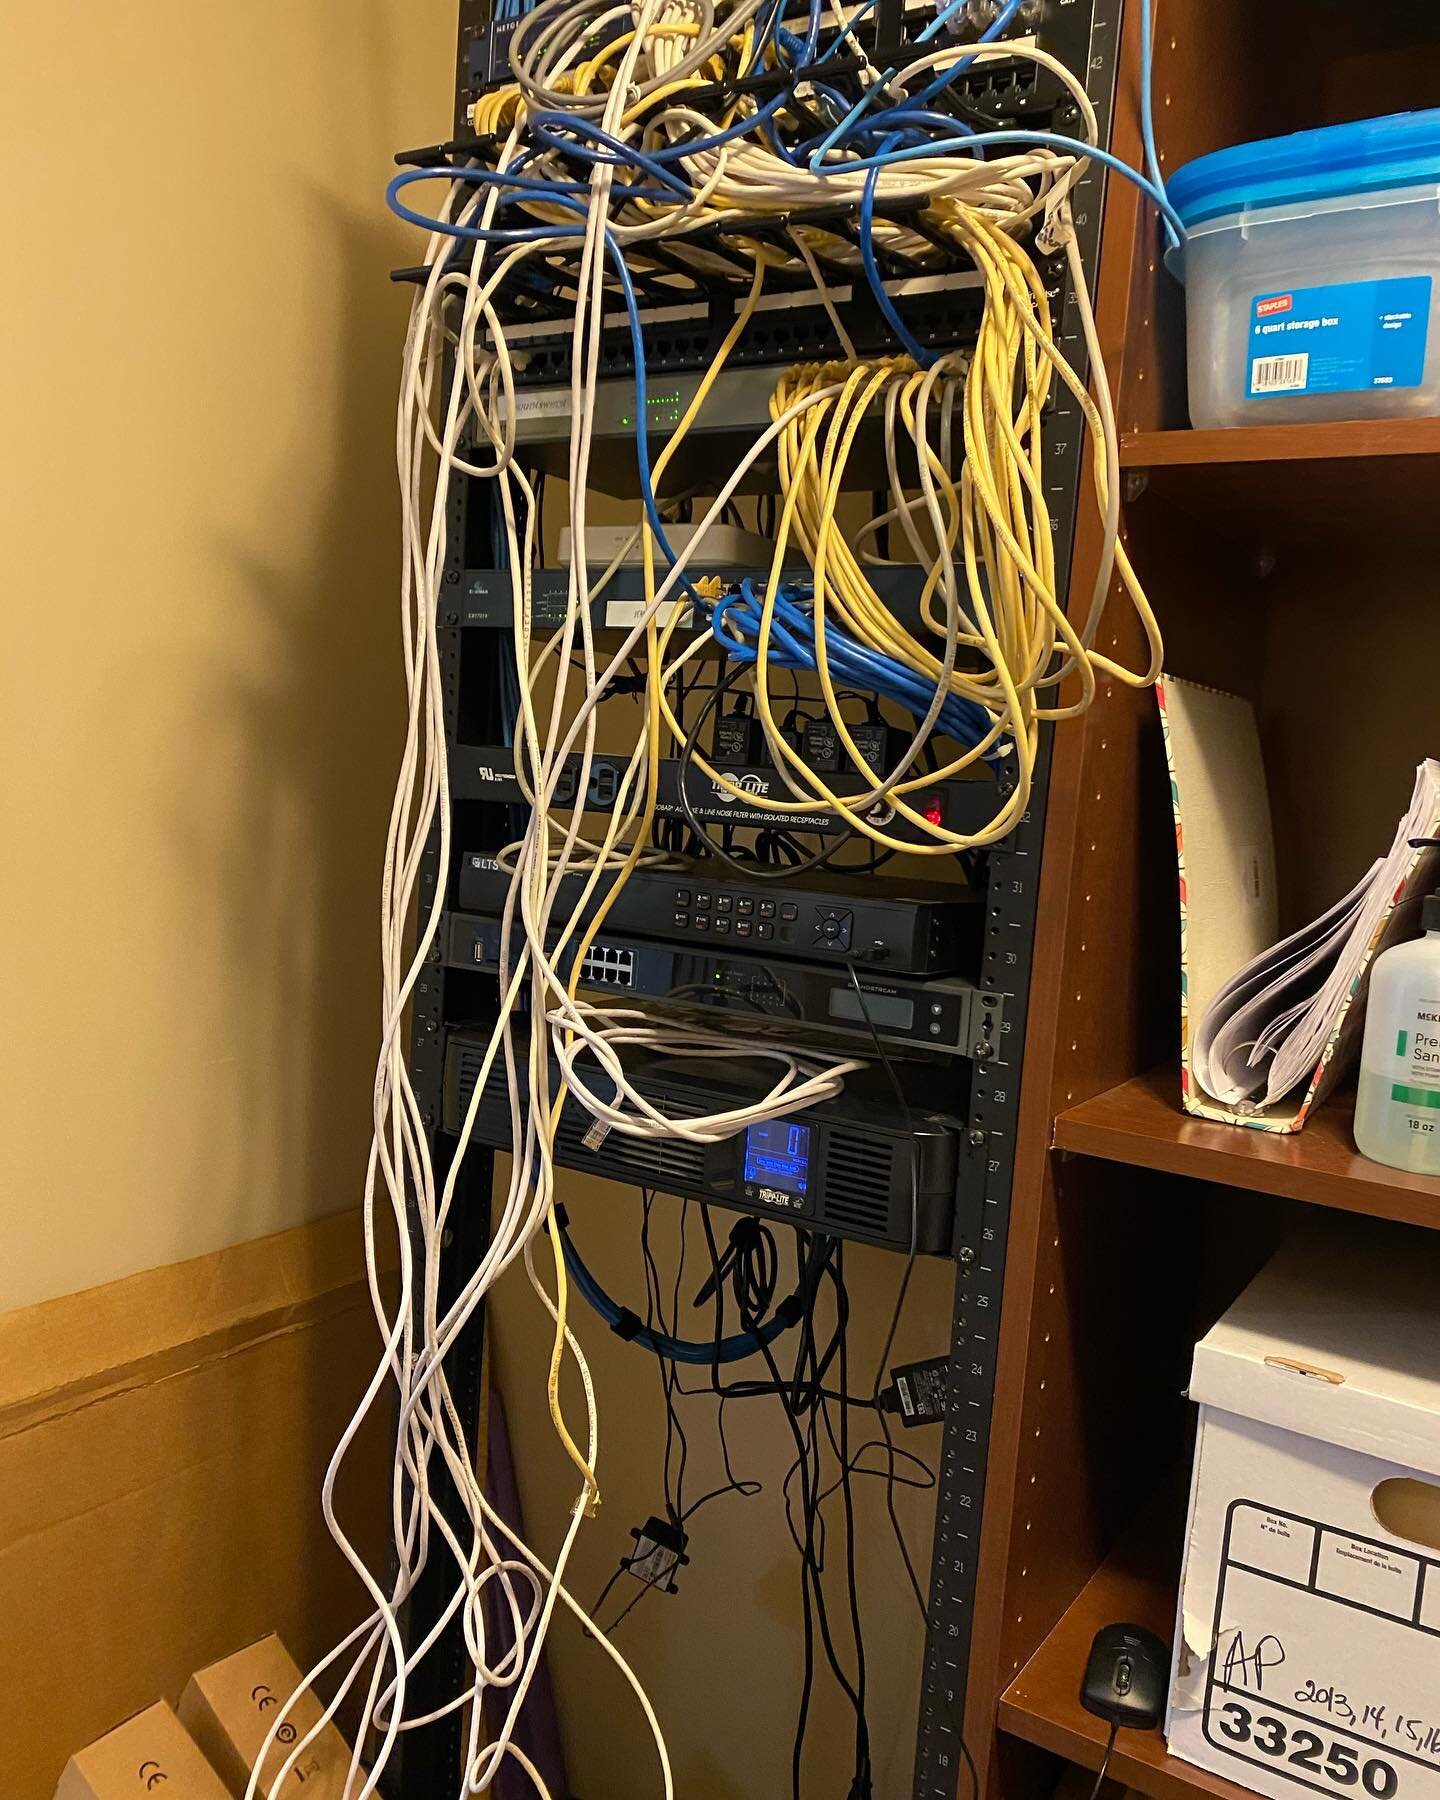 Swipe for the after shot. #t1done #msp #ITsupport #omaha #networkexperts #techsupport #RTFM#systemintegration #omaha #councilbluffs#cybersecurity #technology#disasterrecovery #scalecomputers #lowvoltguy #structuredcabling #datacenter #custom #cablepo